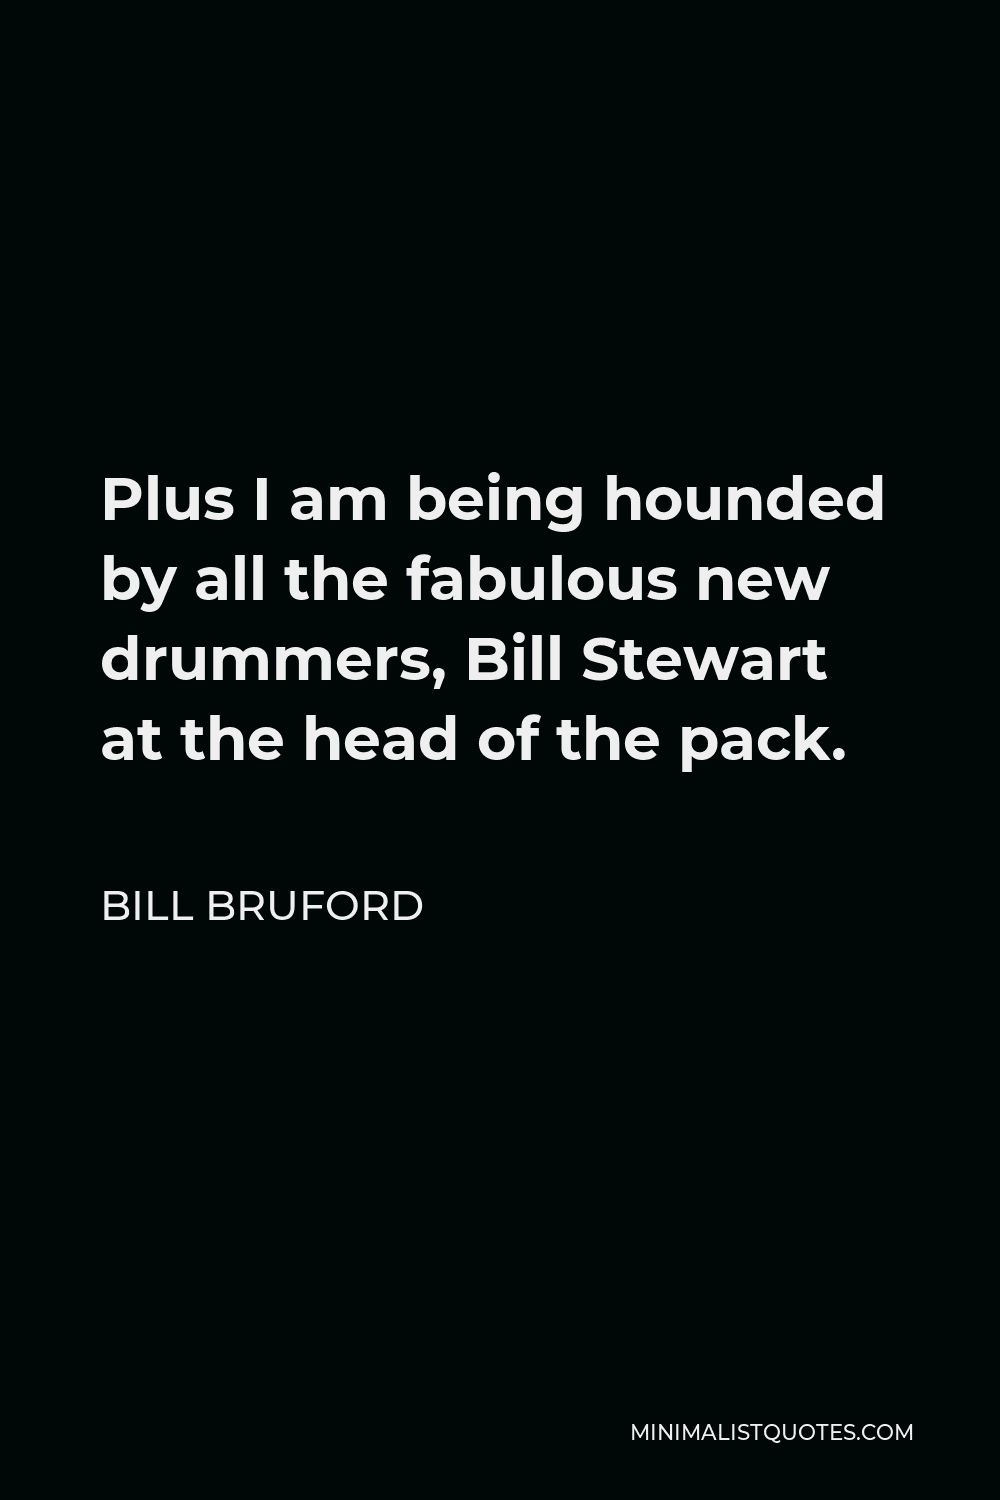 Bill Bruford Quote - Plus I am being hounded by all the fabulous new drummers, Bill Stewart at the head of the pack.